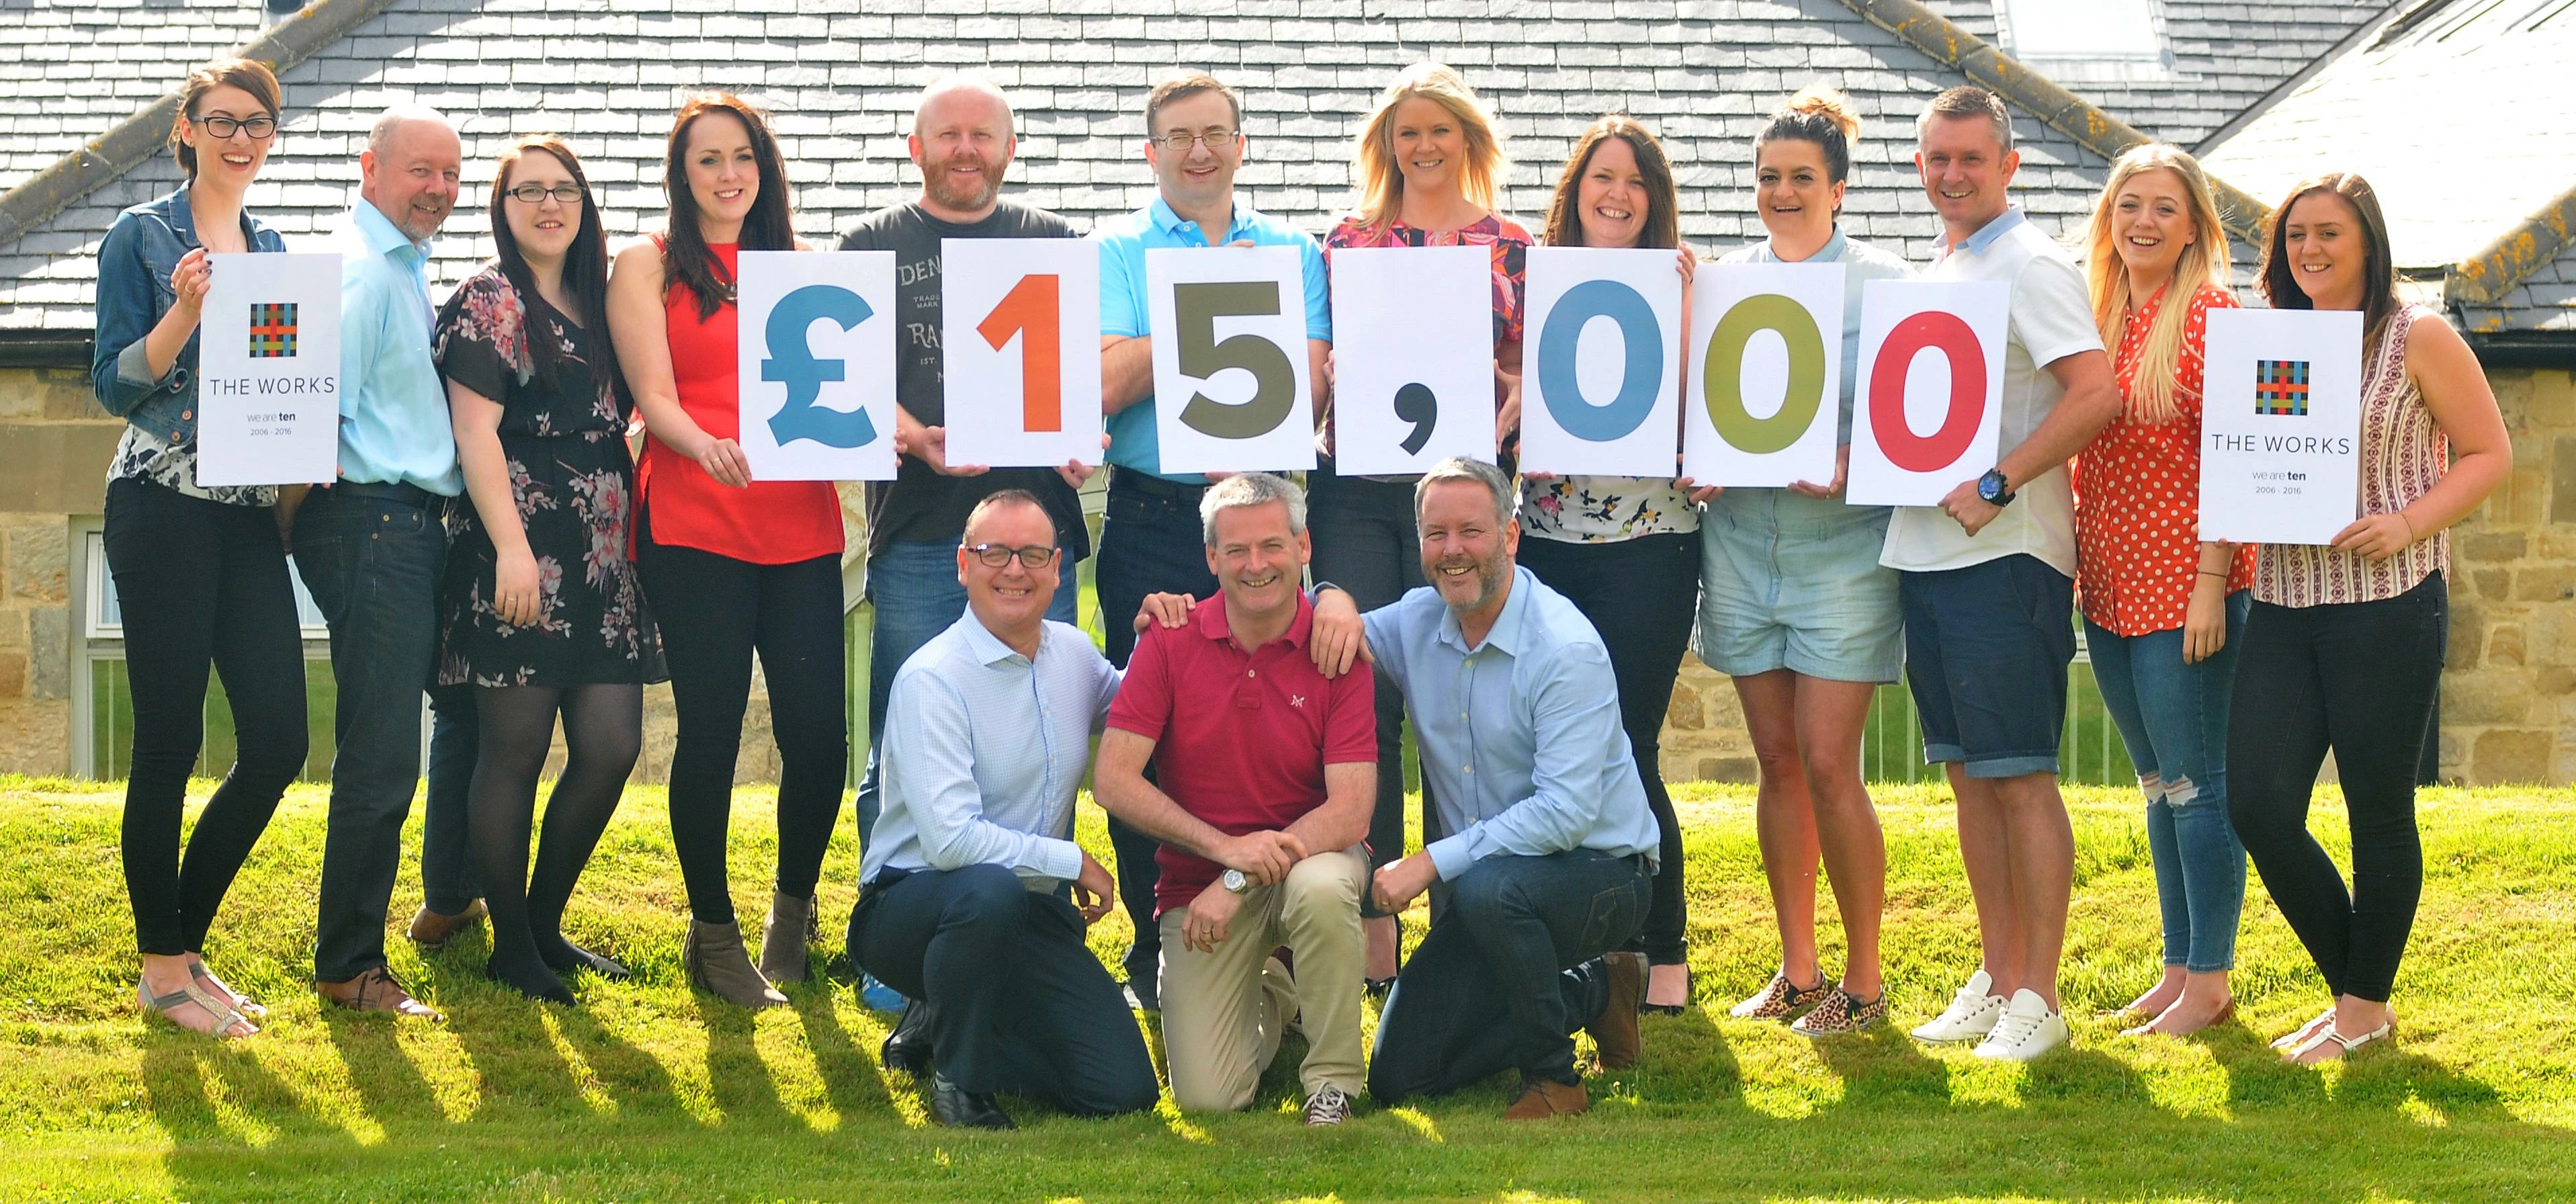 The Works beat fundraising target for milestone year in business